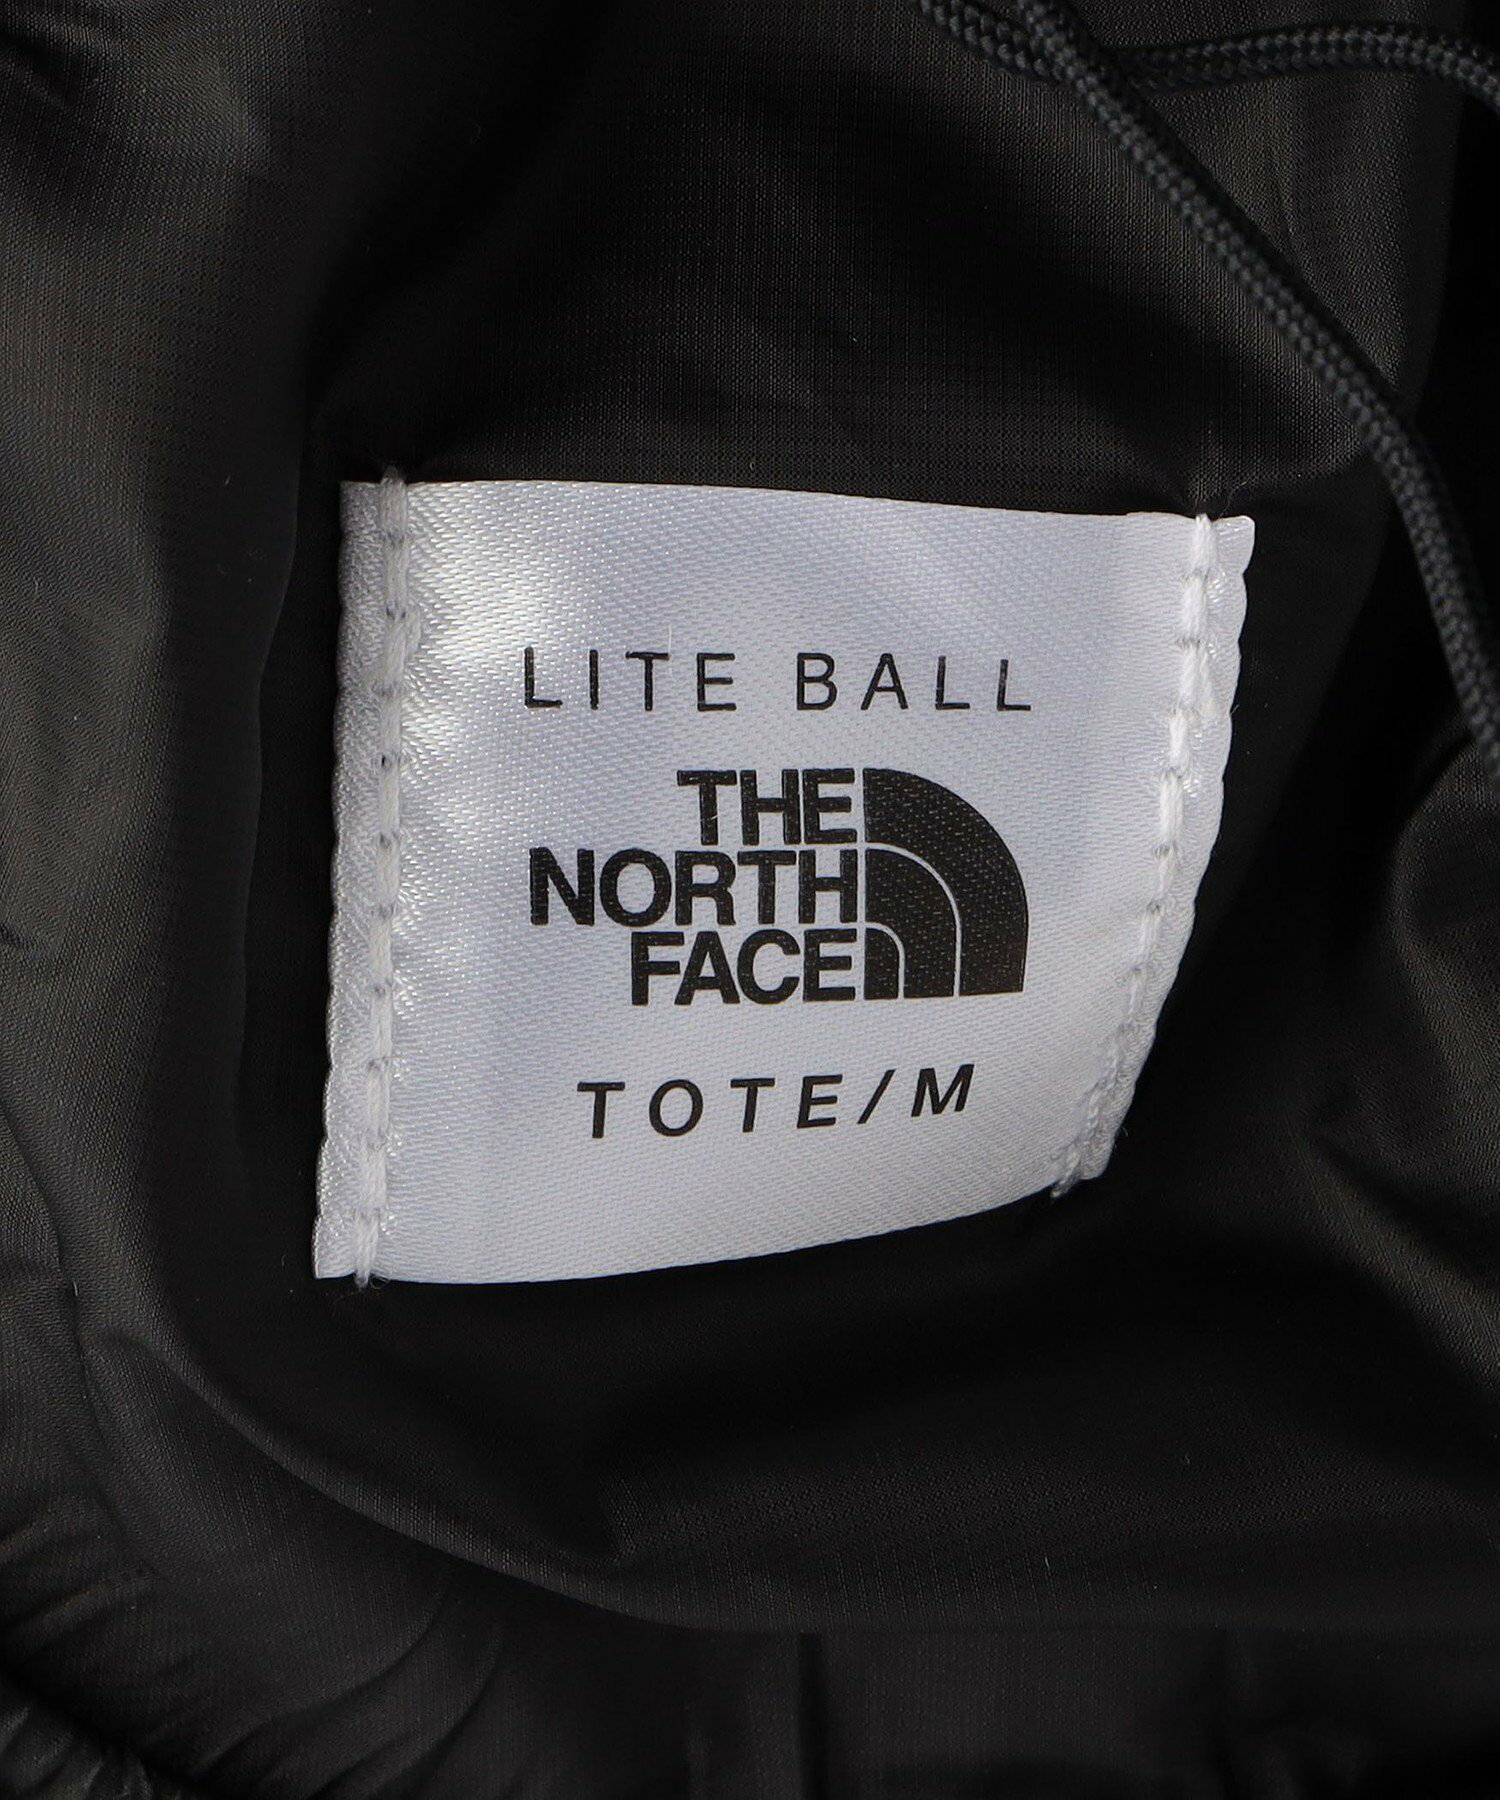 < THE NORTH FACE > LITE BALL トート バッグ M